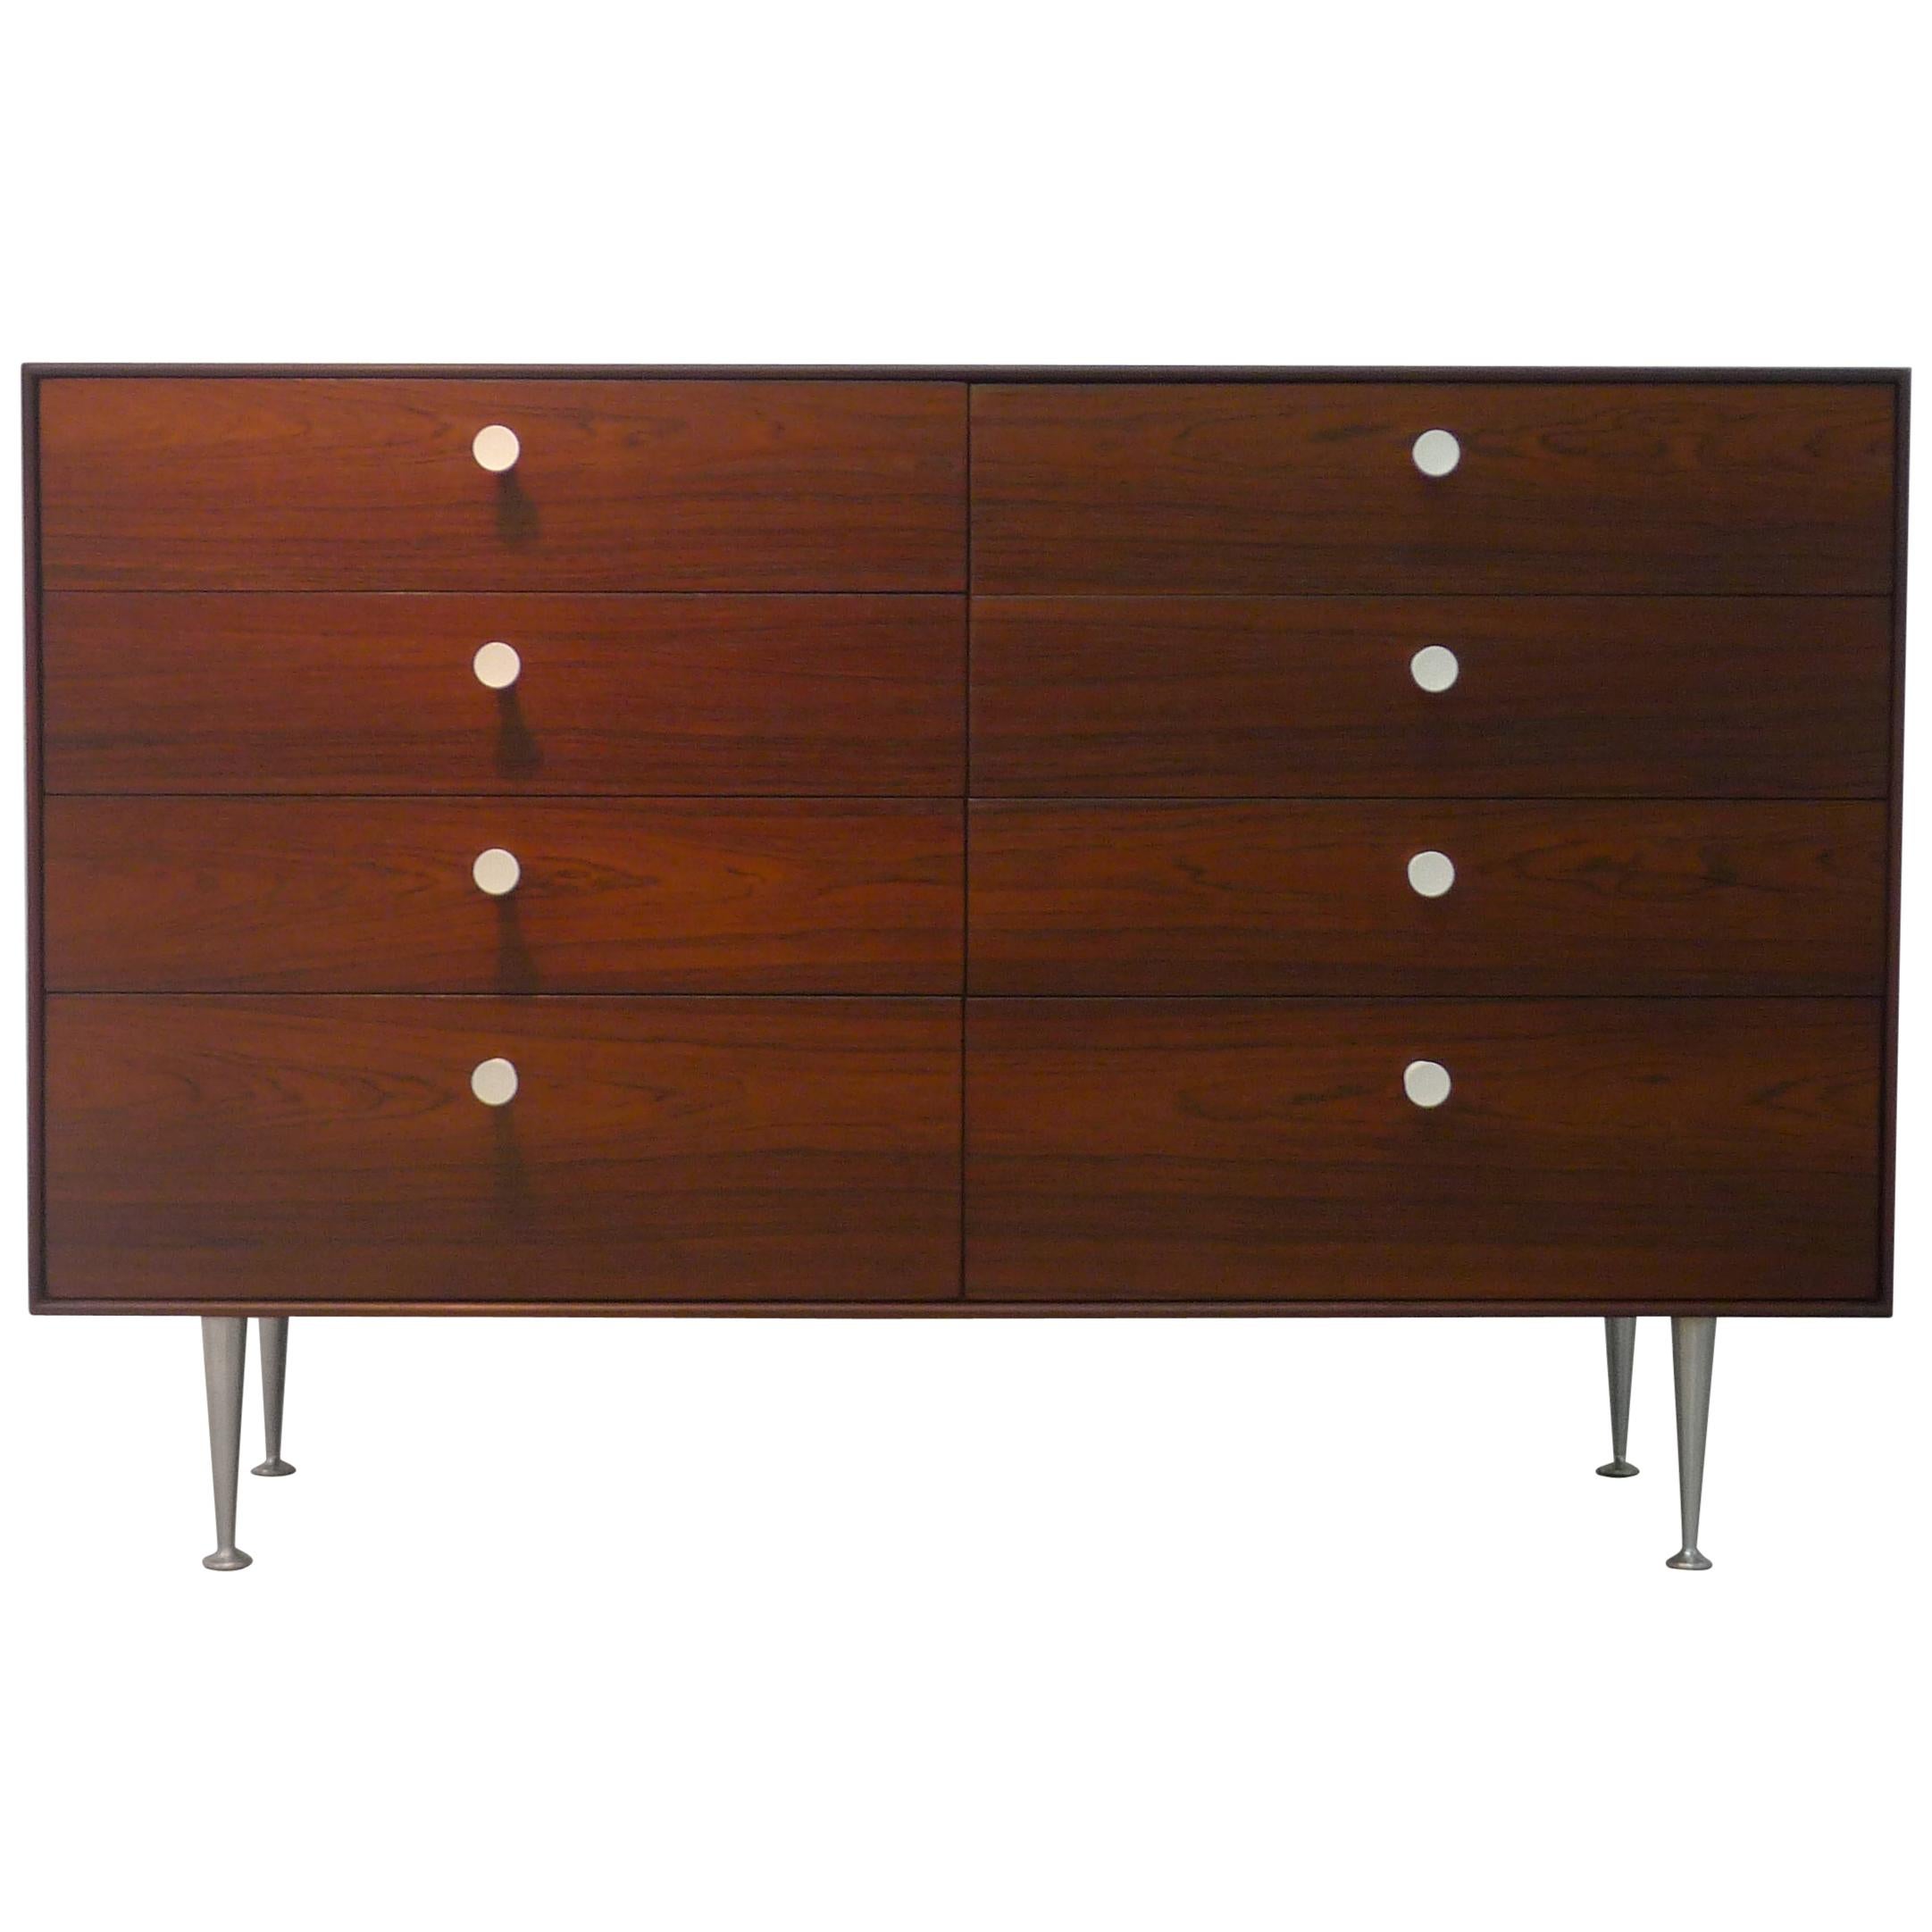 George Nelson for Herman Miller, 1952, Thin Edge Dresser in Rosewood, Label